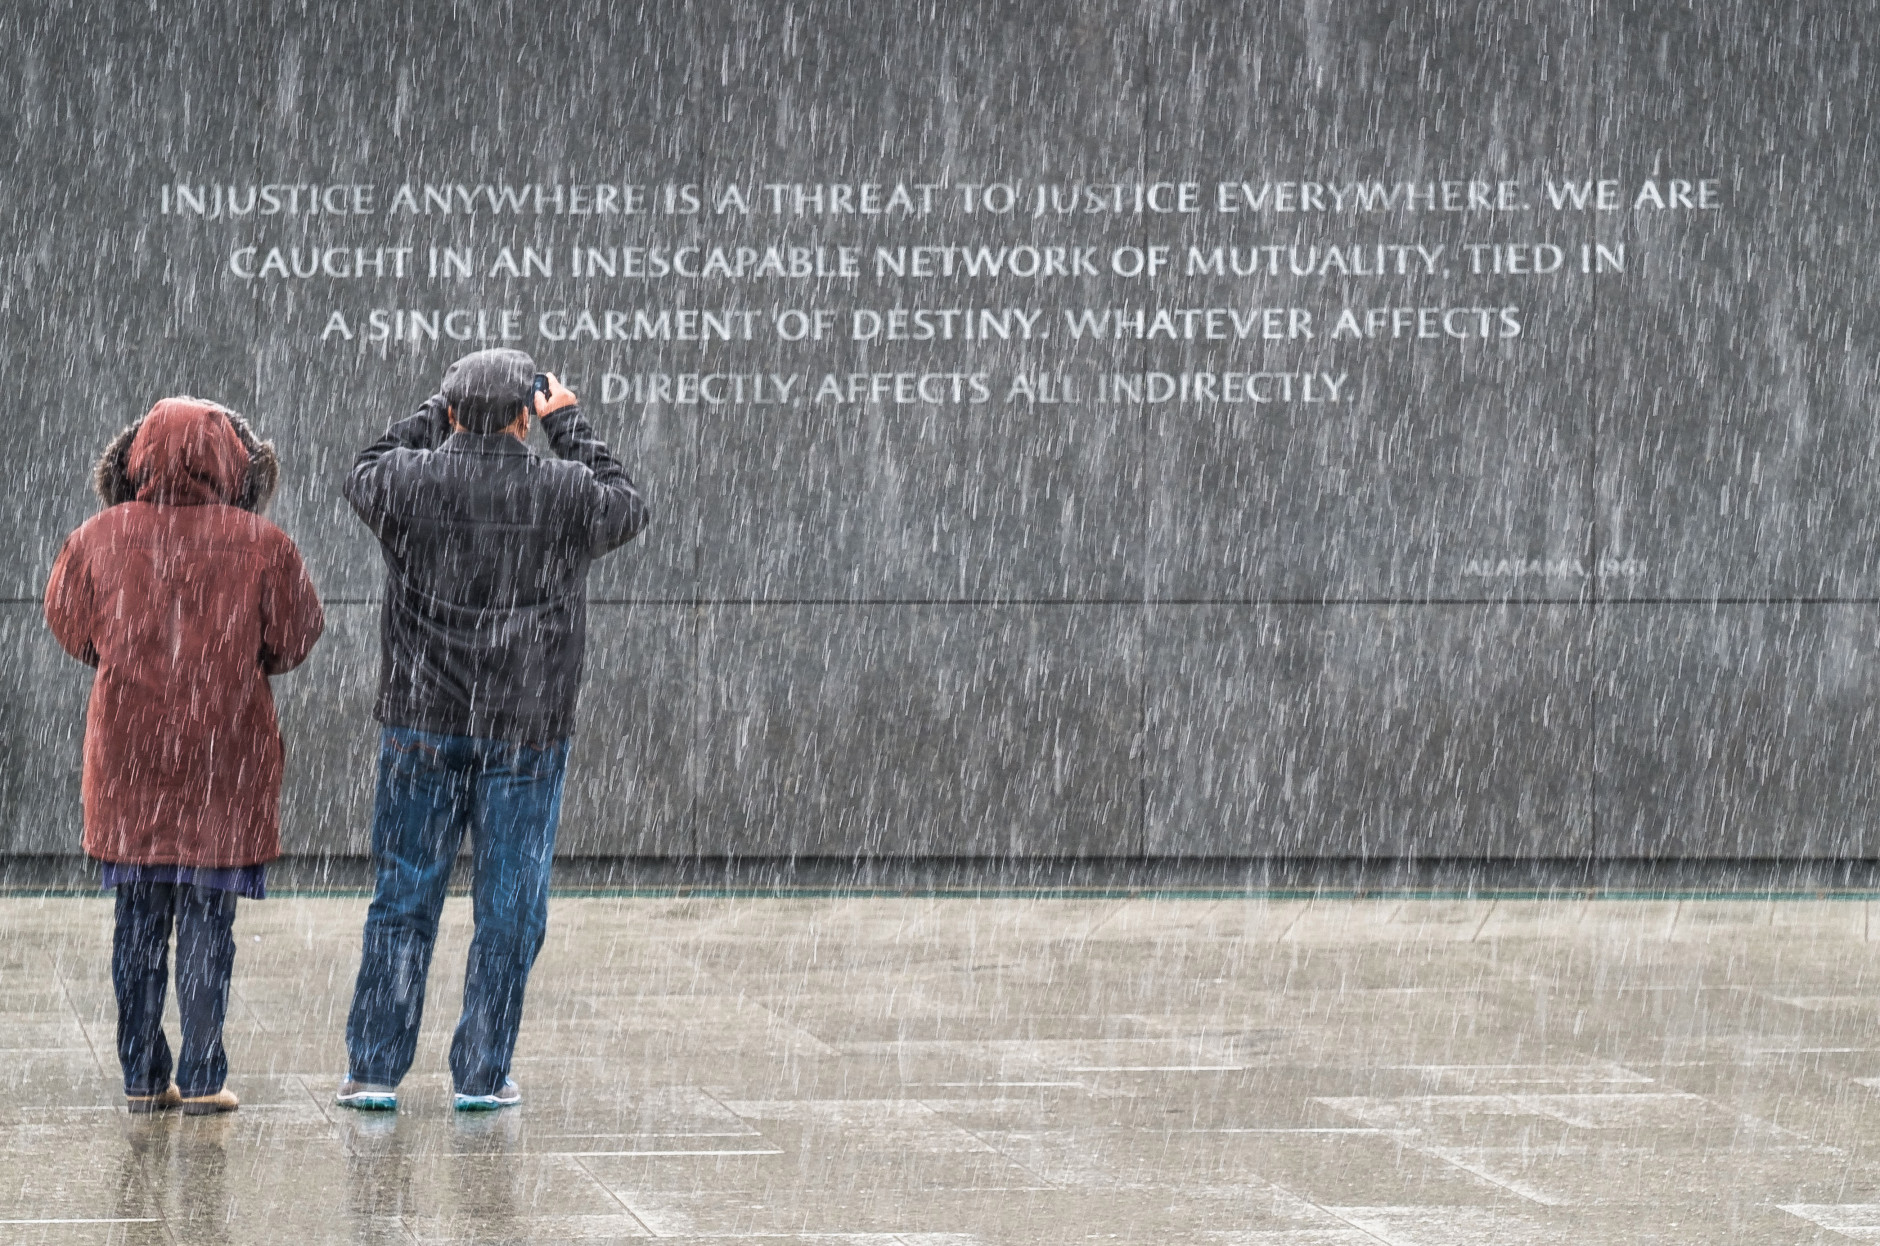 Visitors at the Martin Luther King, Jr. Memorial in Washington stop to photograph the quotes etched into the memorial's back wall while it snows on Sunday, Jan. 17, 2016.  (AP Photo/J. David Ake)